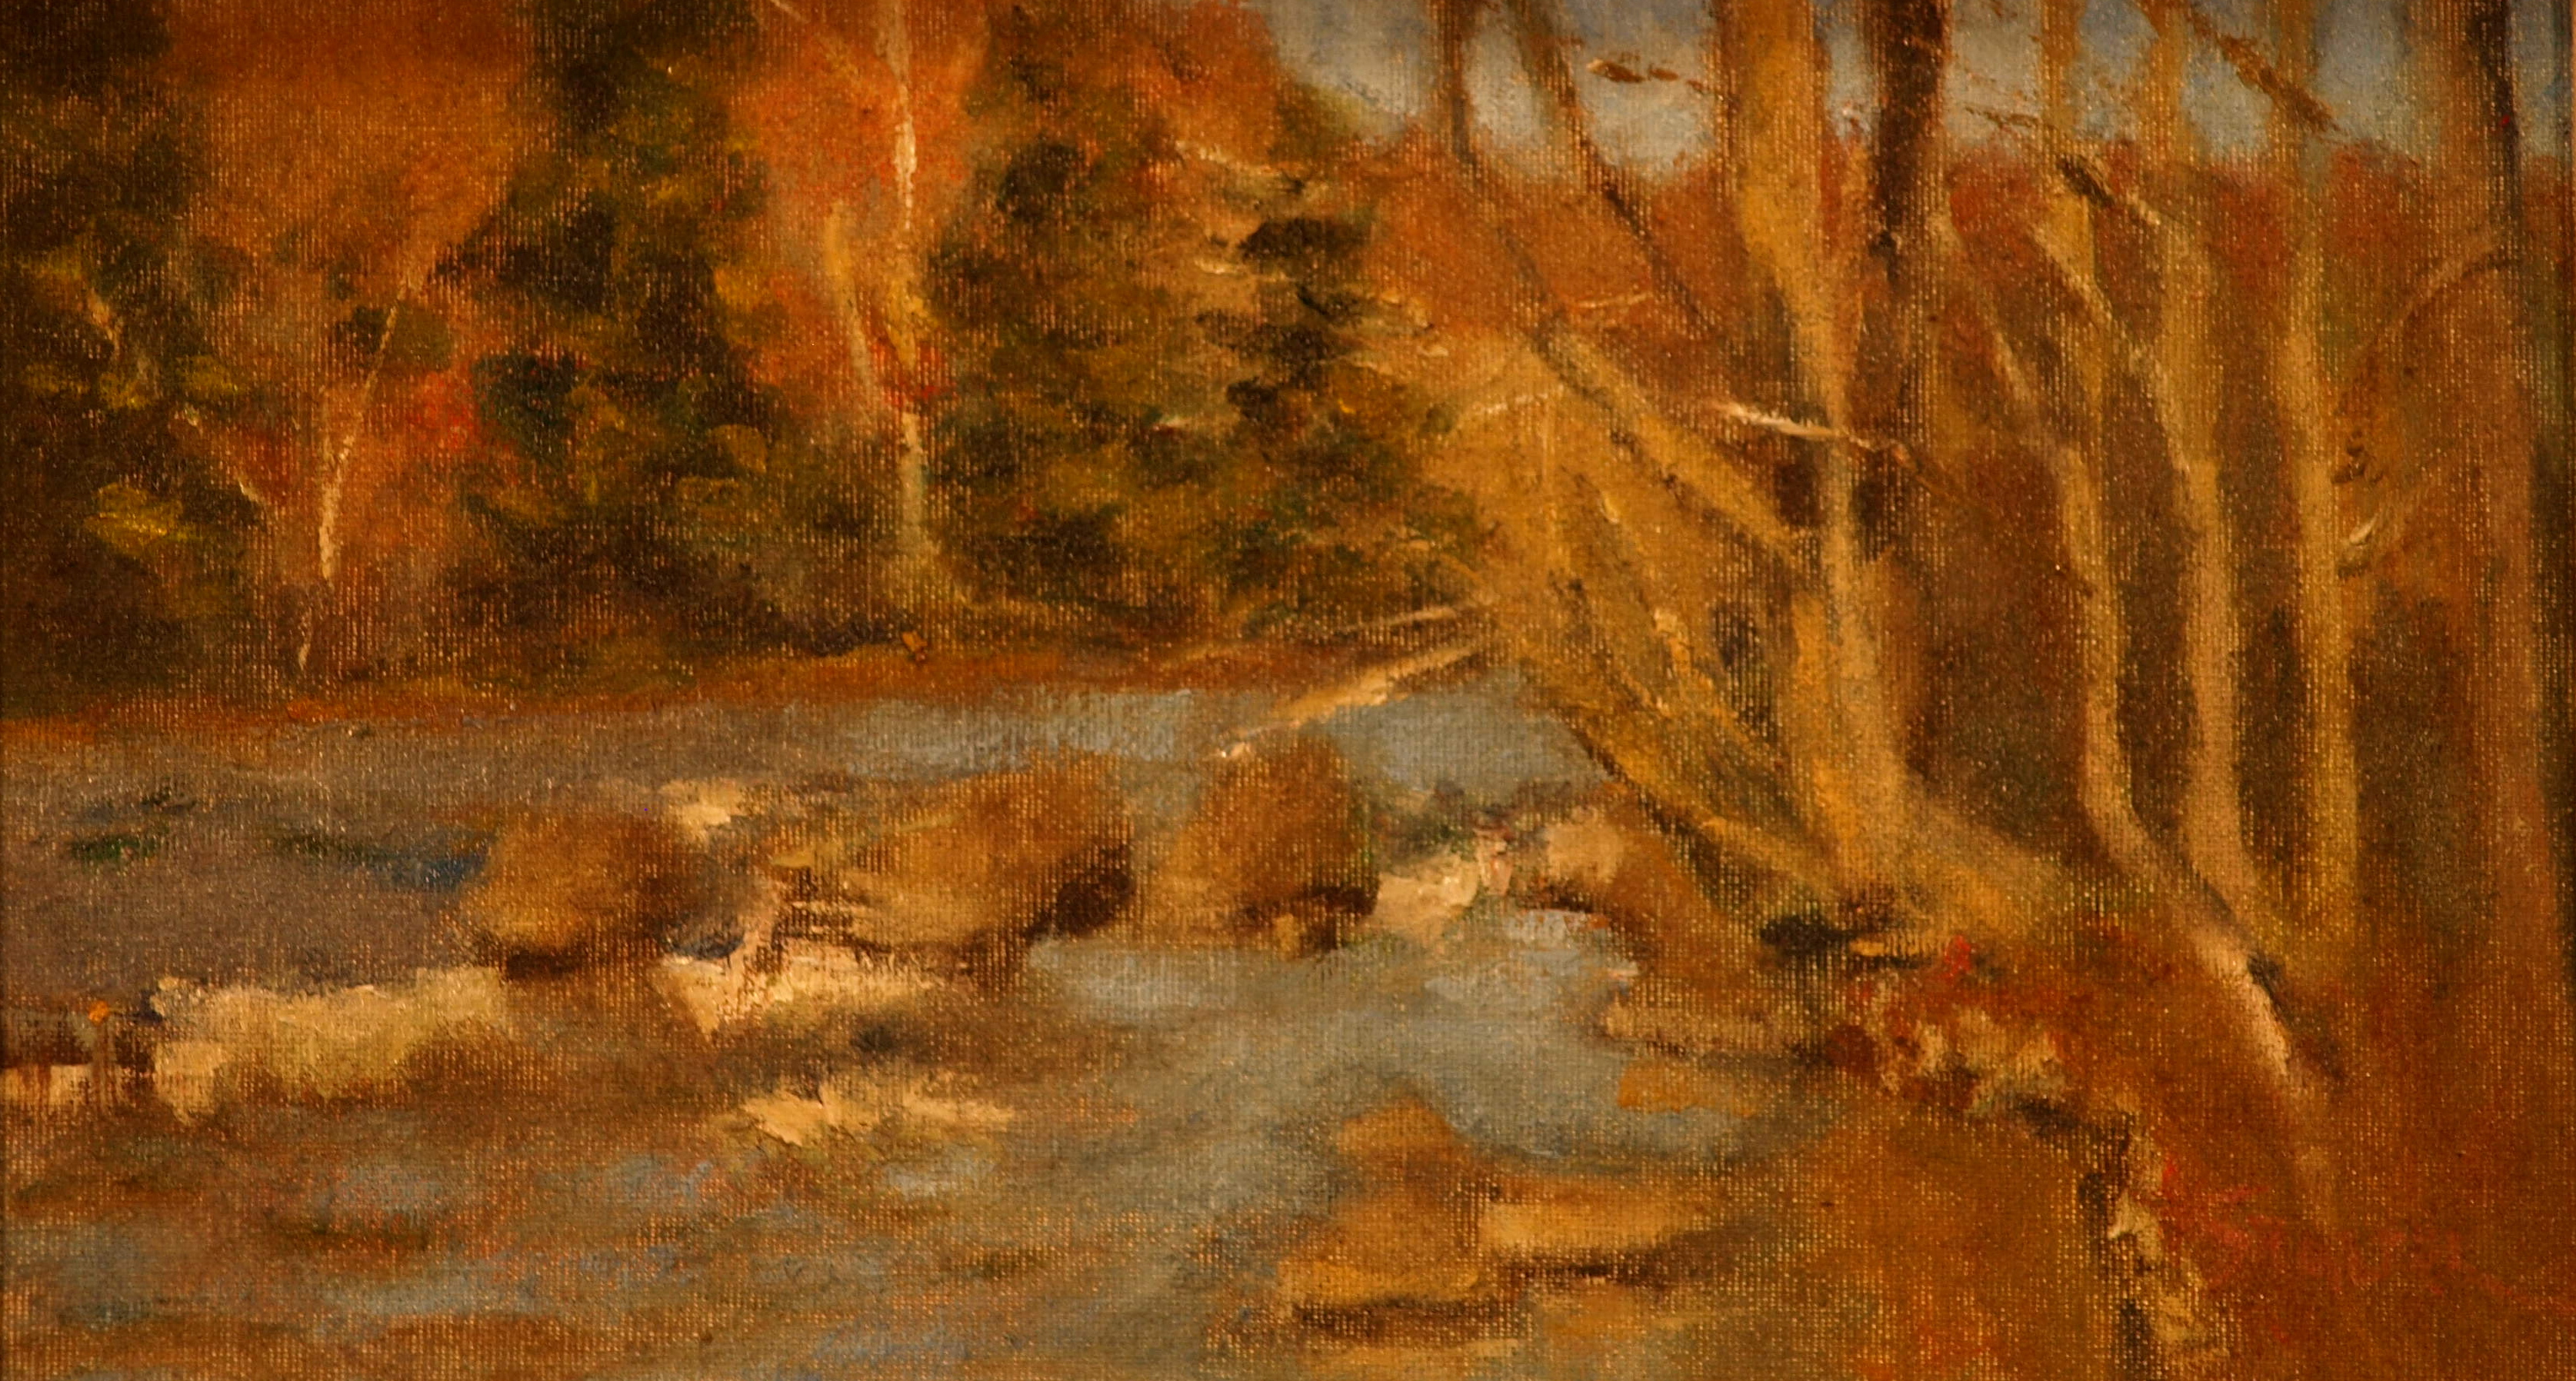 Housatonic Rapids, Oil on Canvas on Panel, 8 x 14 Inches, by Richard Stalter, $225